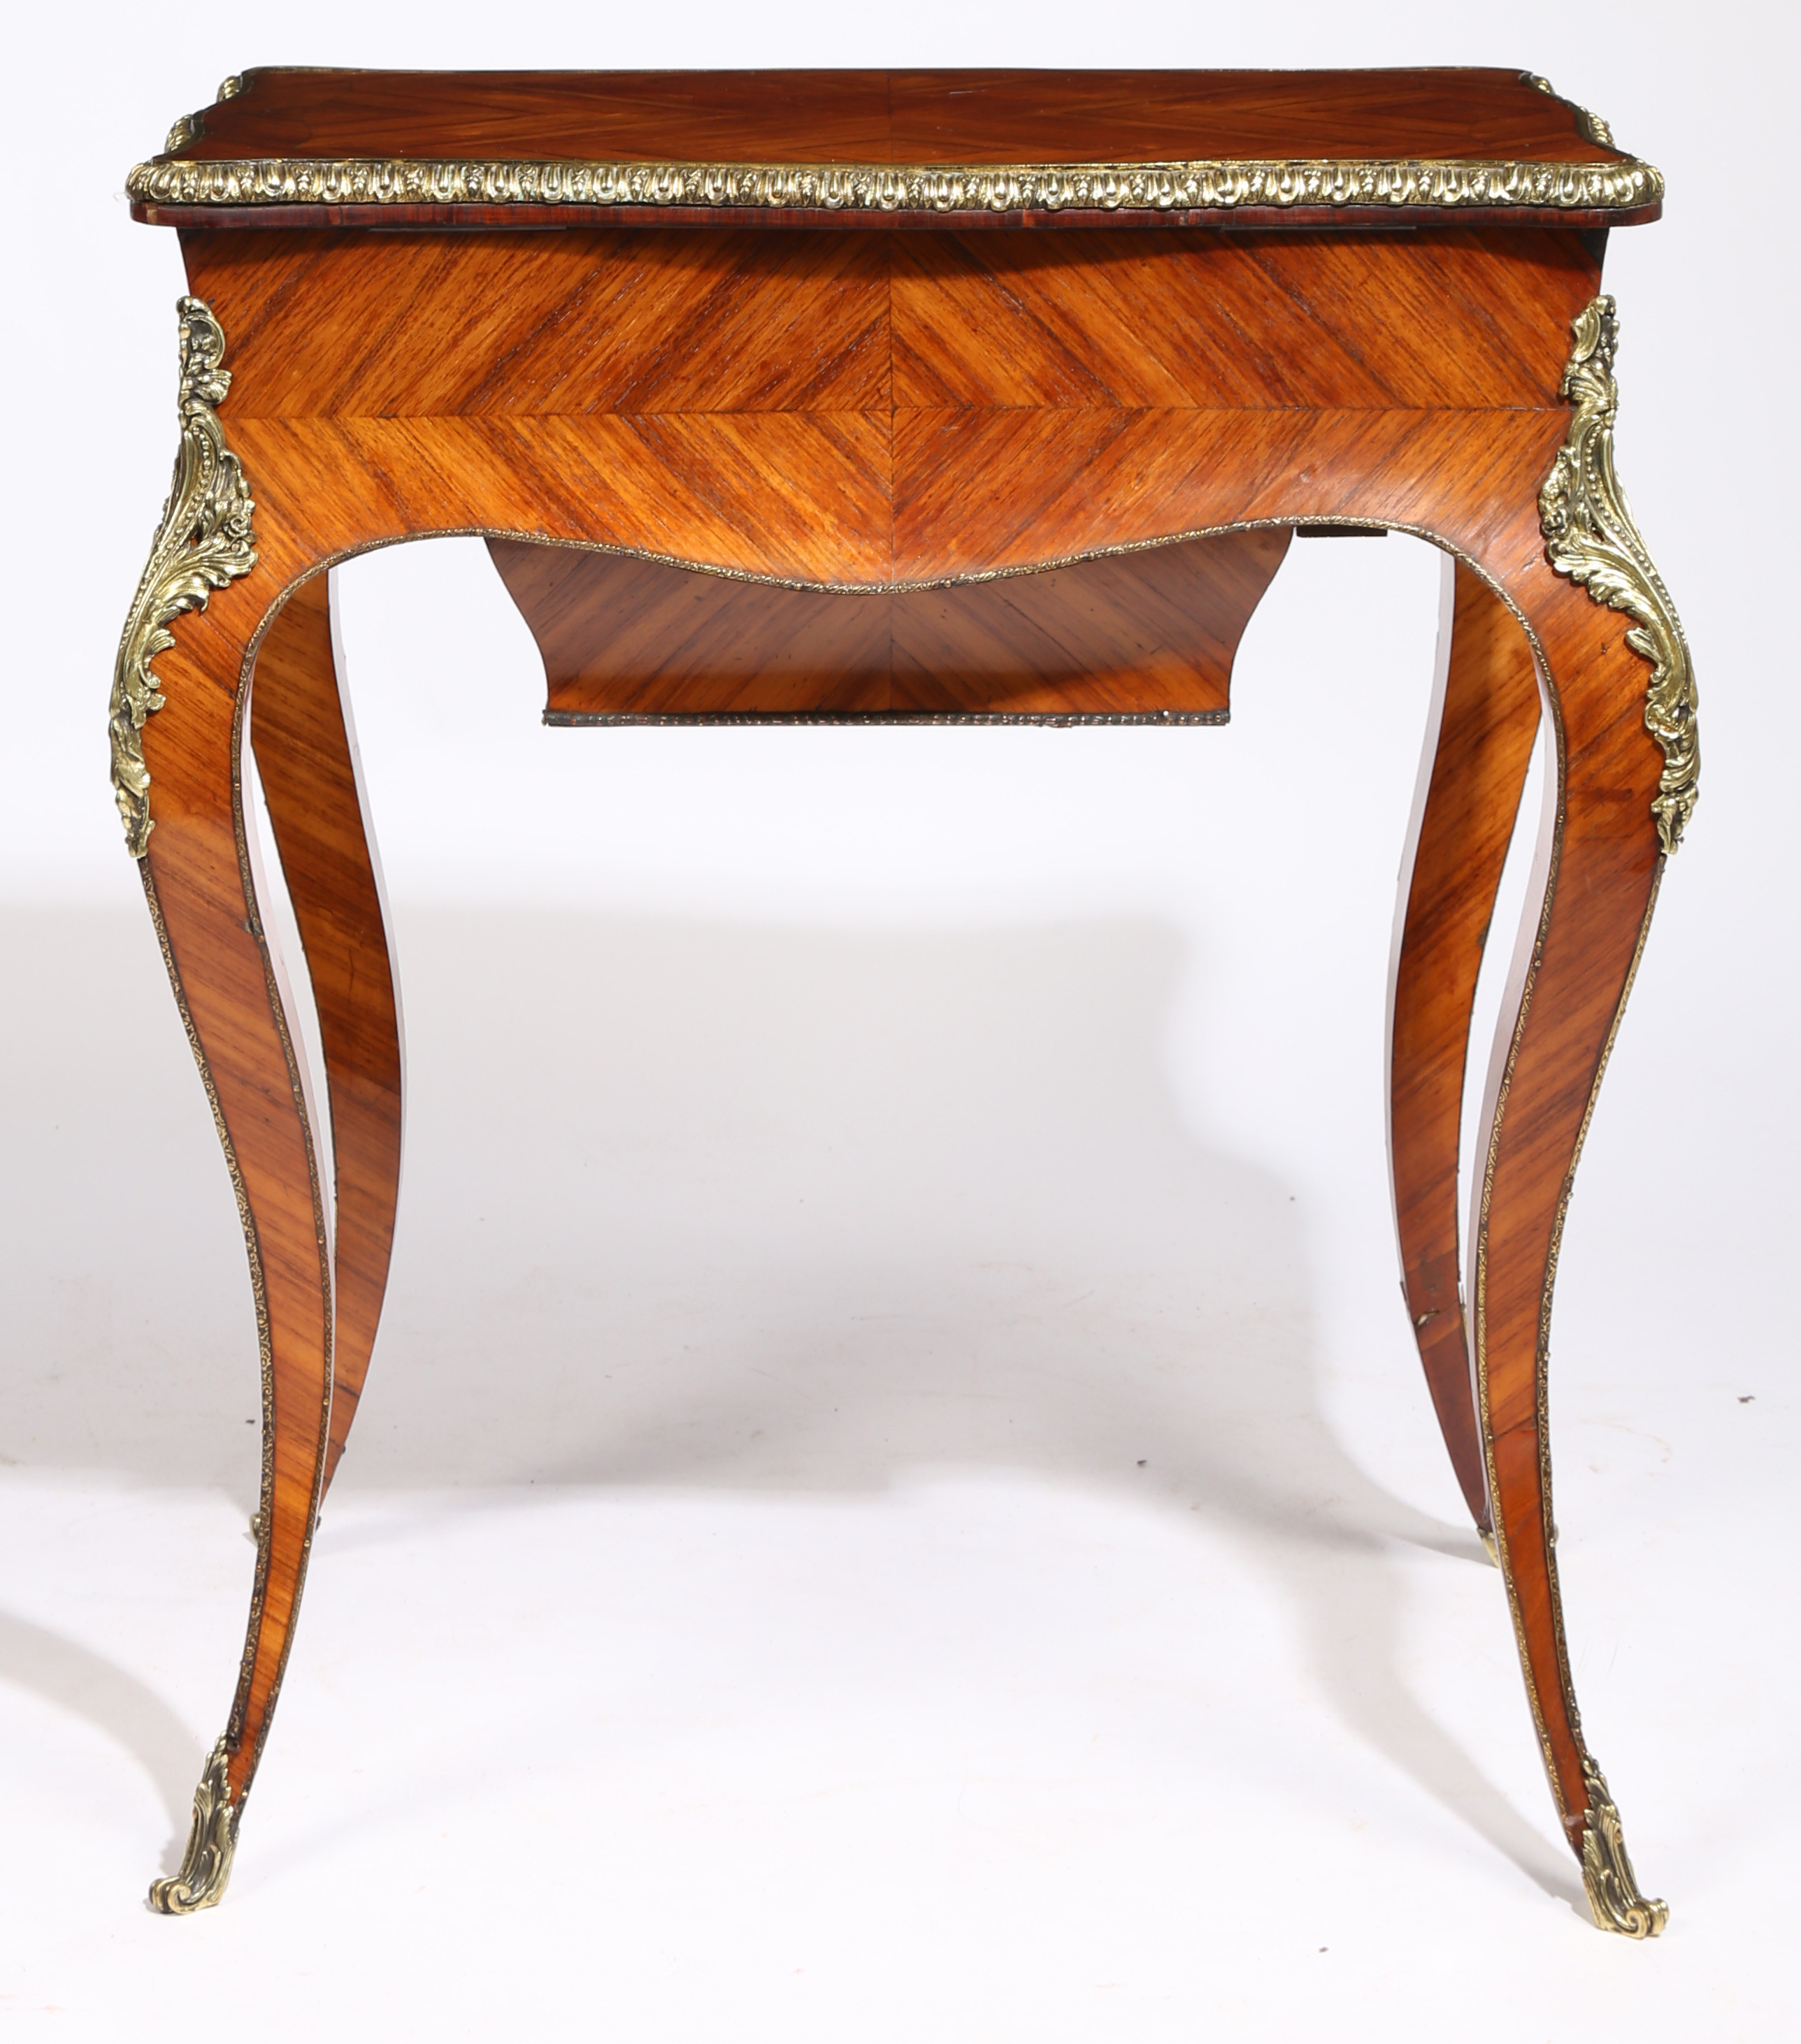 A 19TH CENTURY FRENCH KINGWOOD AND ORMOLU TABLE. - Image 13 of 13